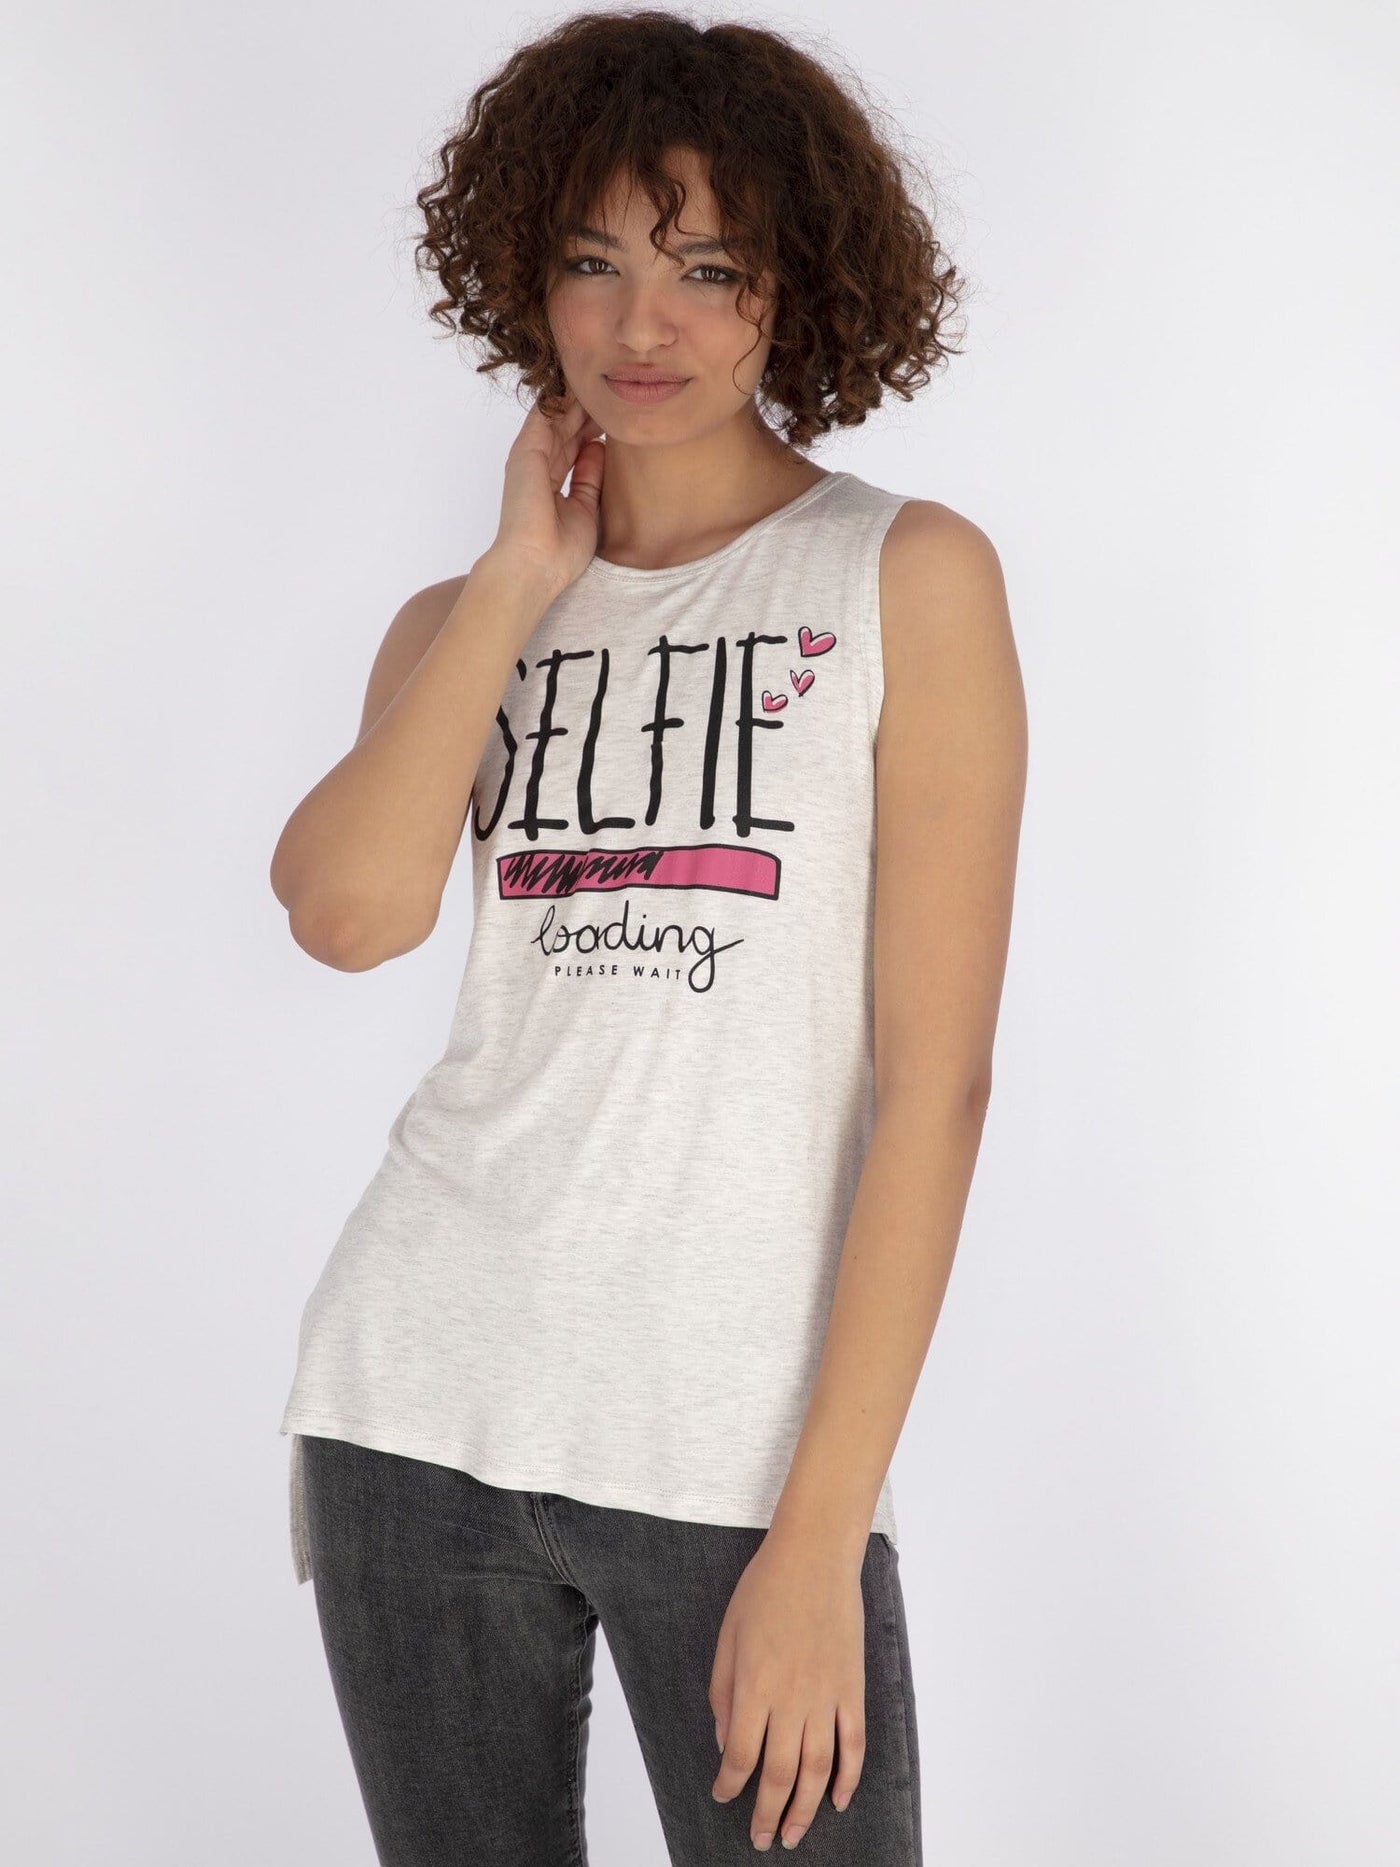 OR Tops & Blouses Front Text Print 'Selfie Loading Please Wait' Sleeveless Top